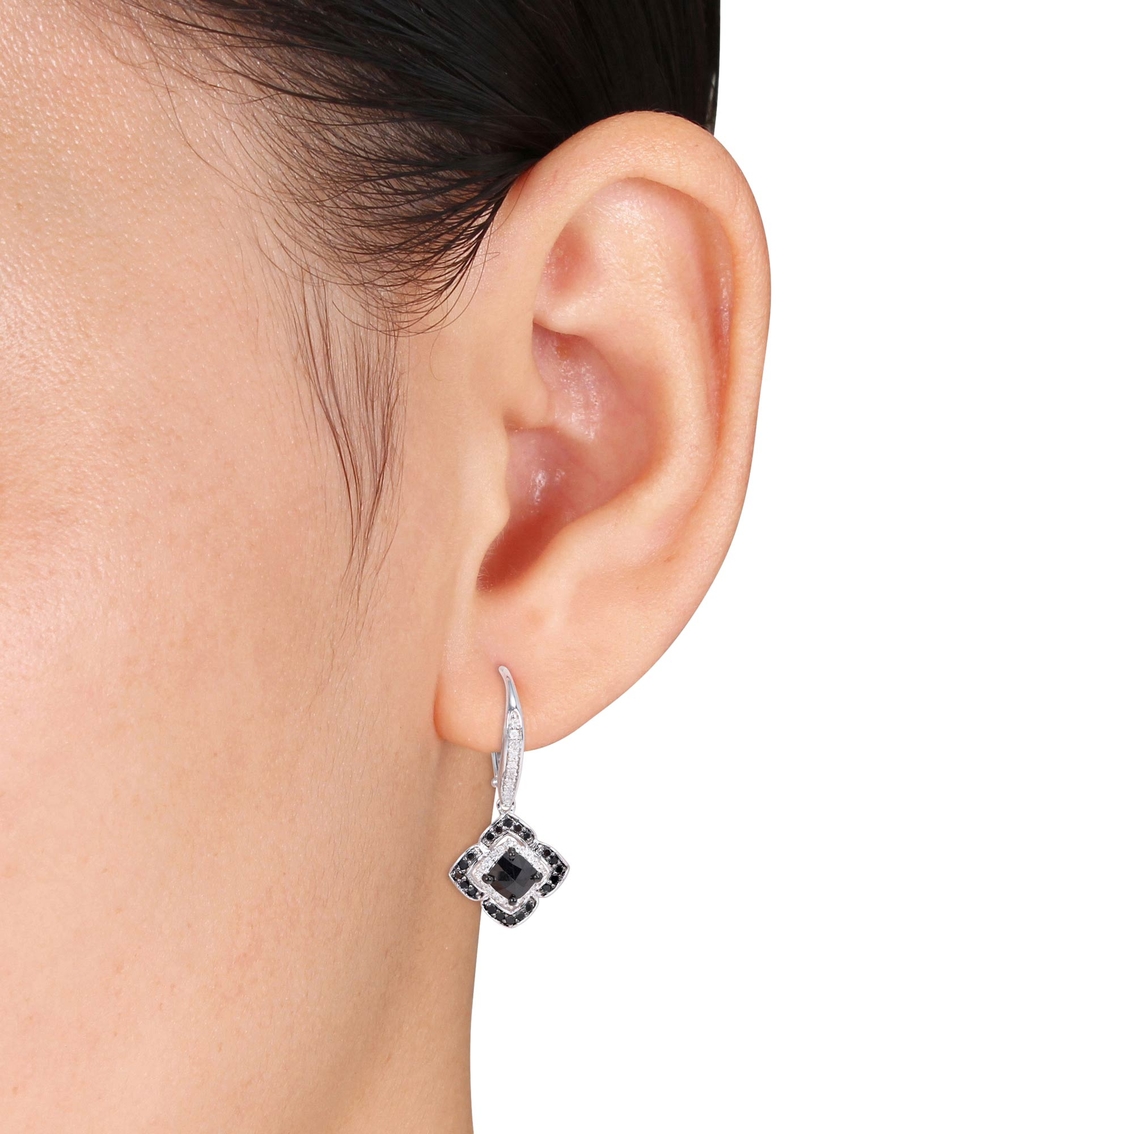 Diamore Sterling Silver 1 1/2 CTW Black and White Diamond Halo Earrings - Image 2 of 2